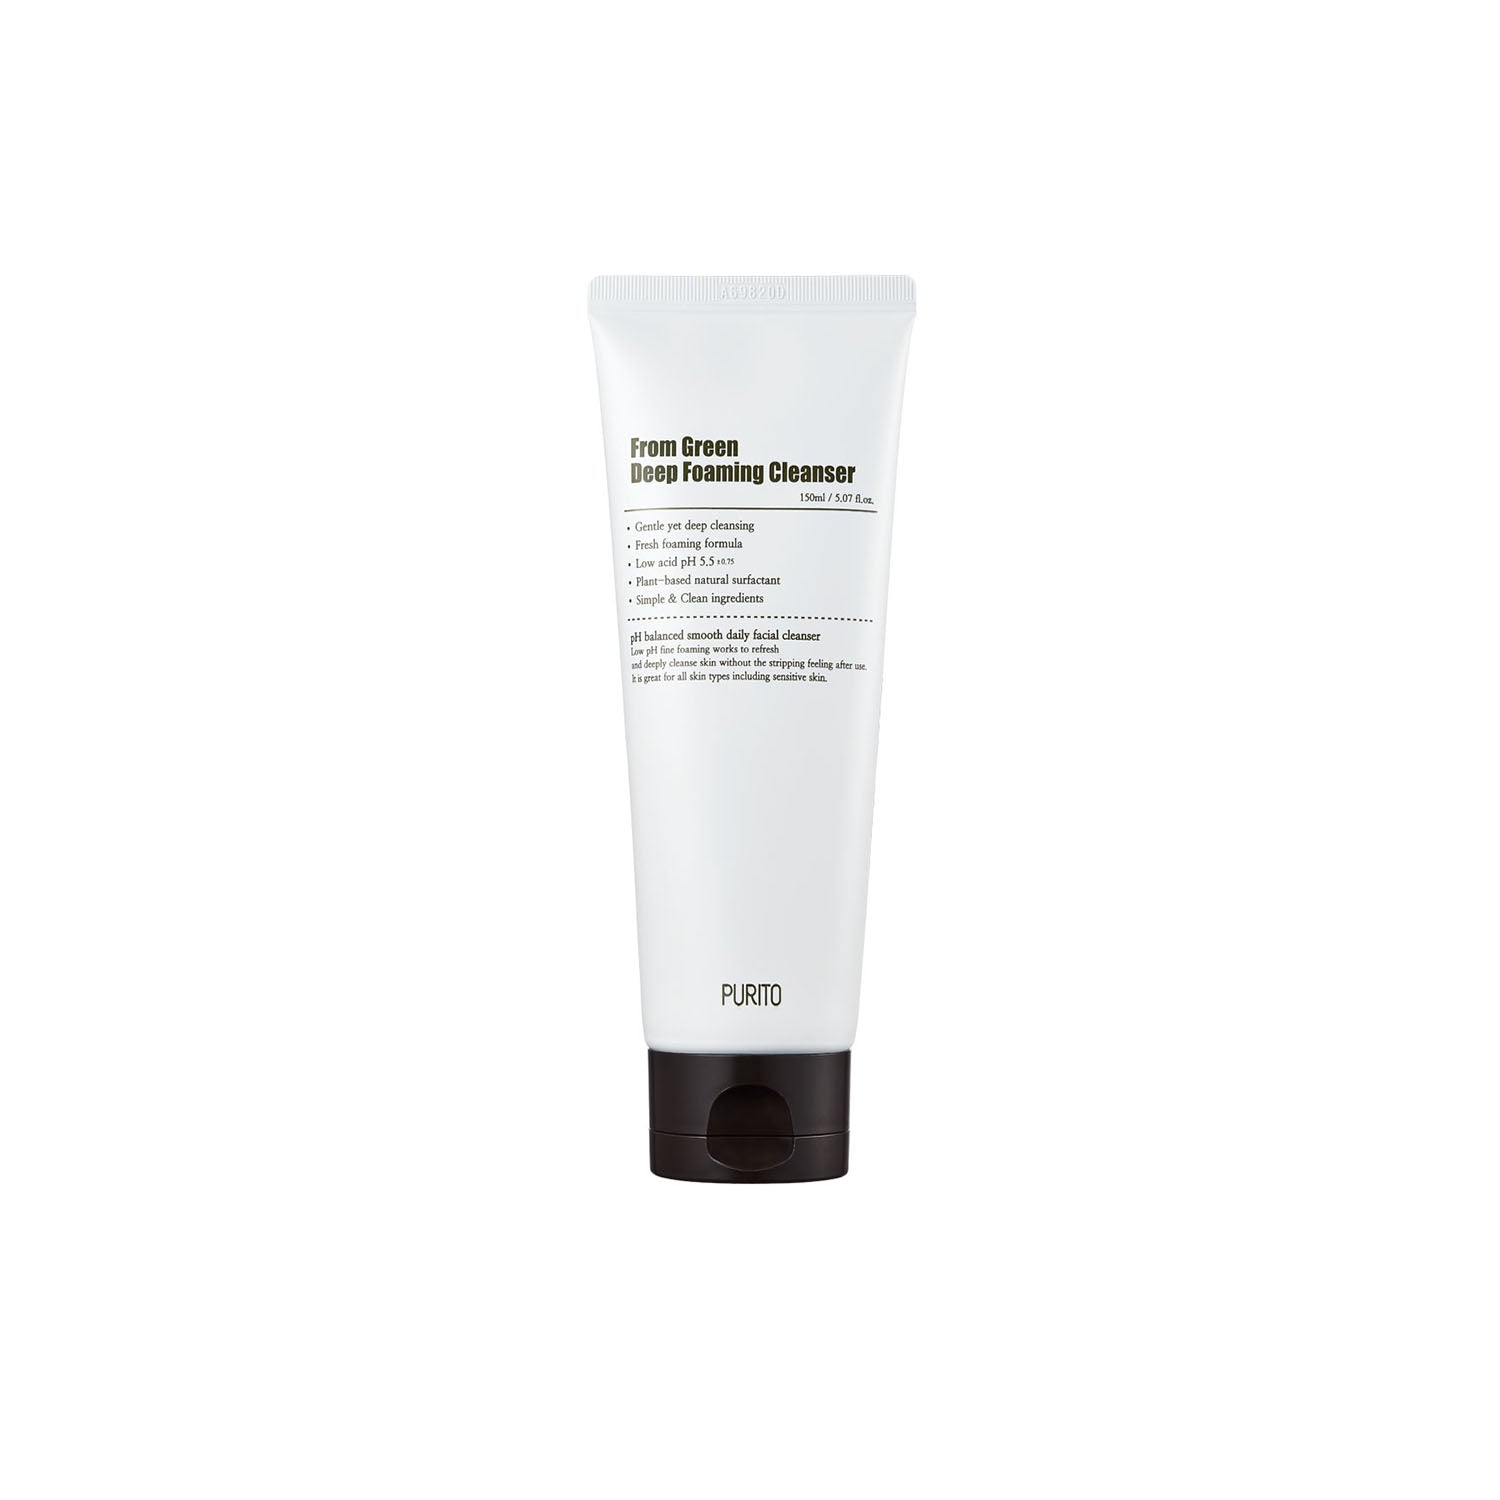 PURITO FROM GREEN DEEP FOAMING CLEANSER